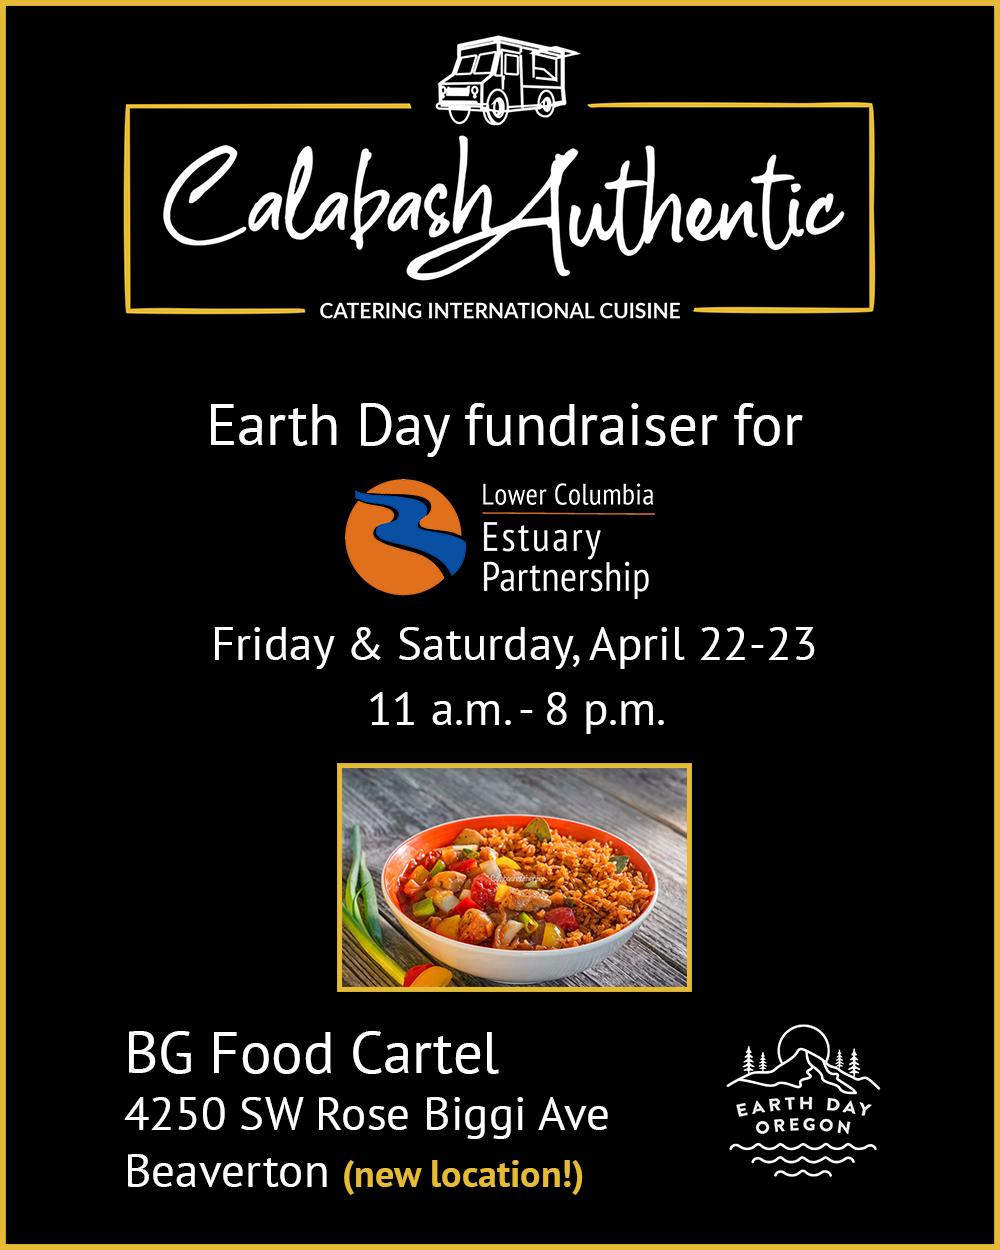 poster with Calabash fundraiser details